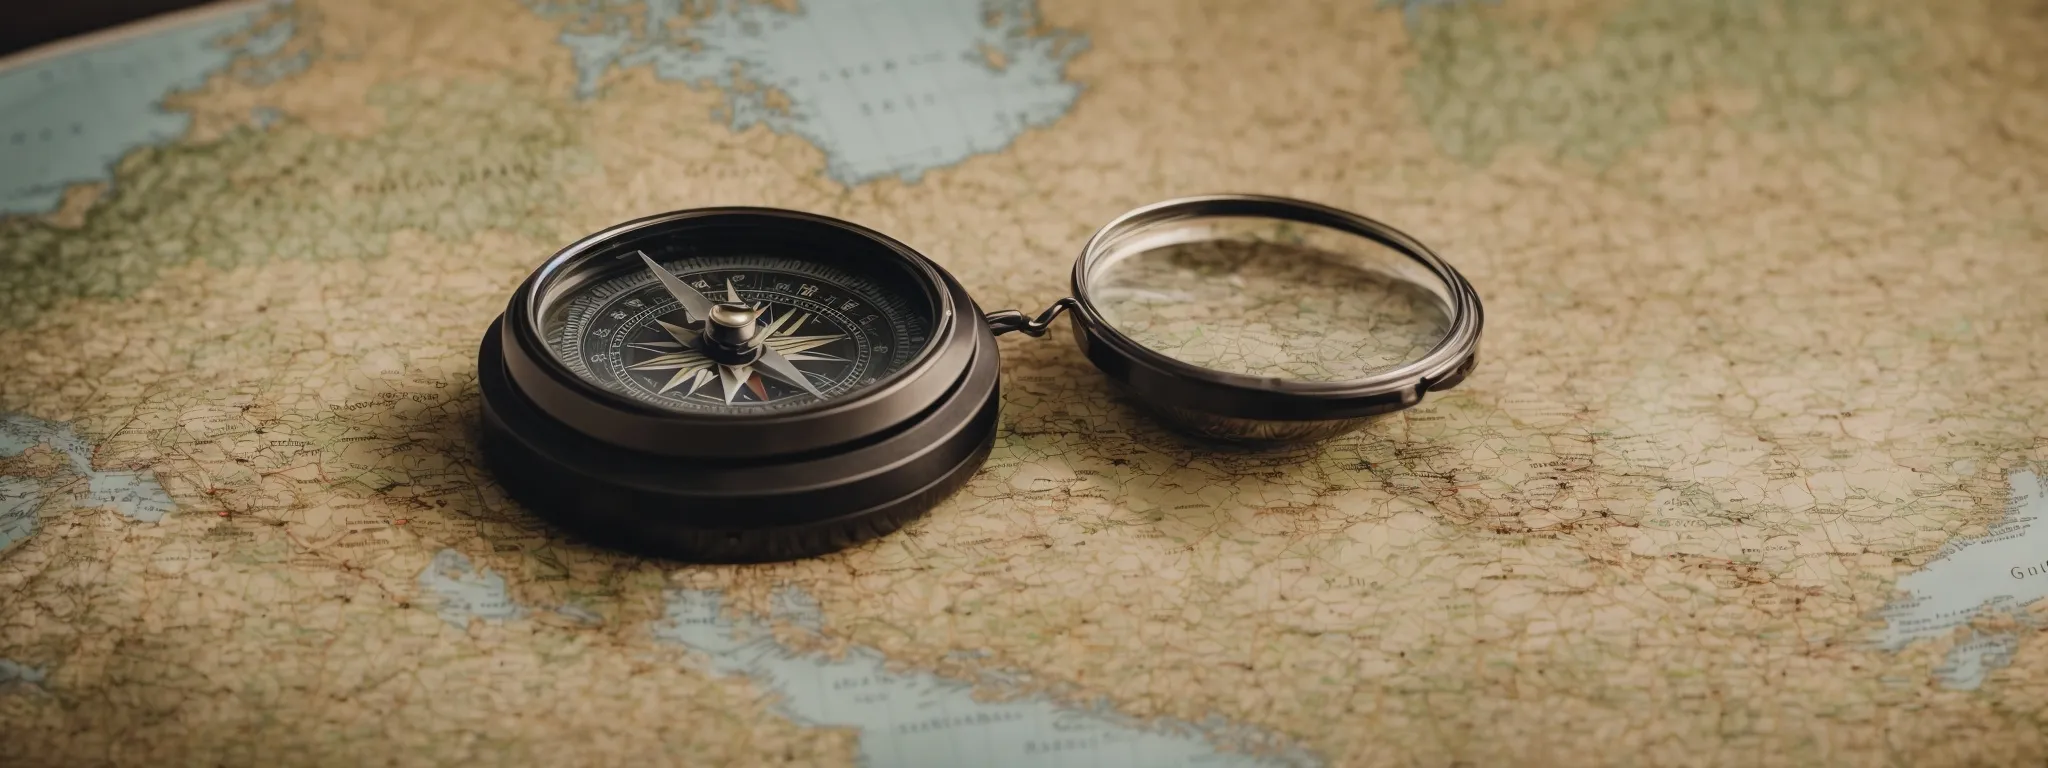 a compass on a map highlighting different regions amidst prominent local landmarks.